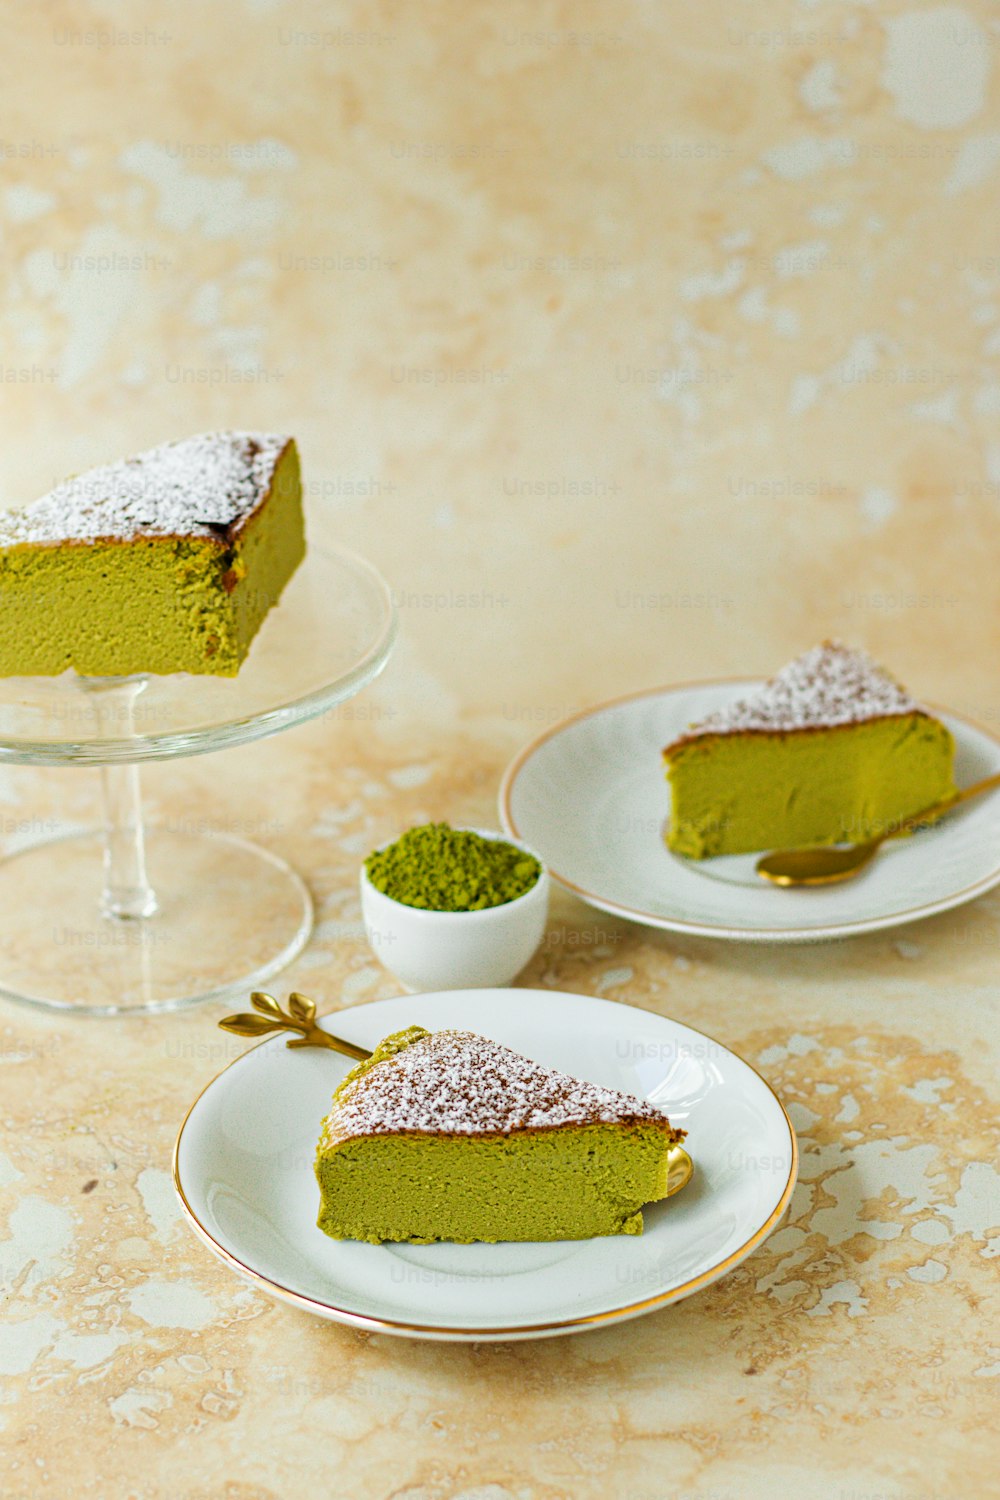 a slice of green cake on a plate